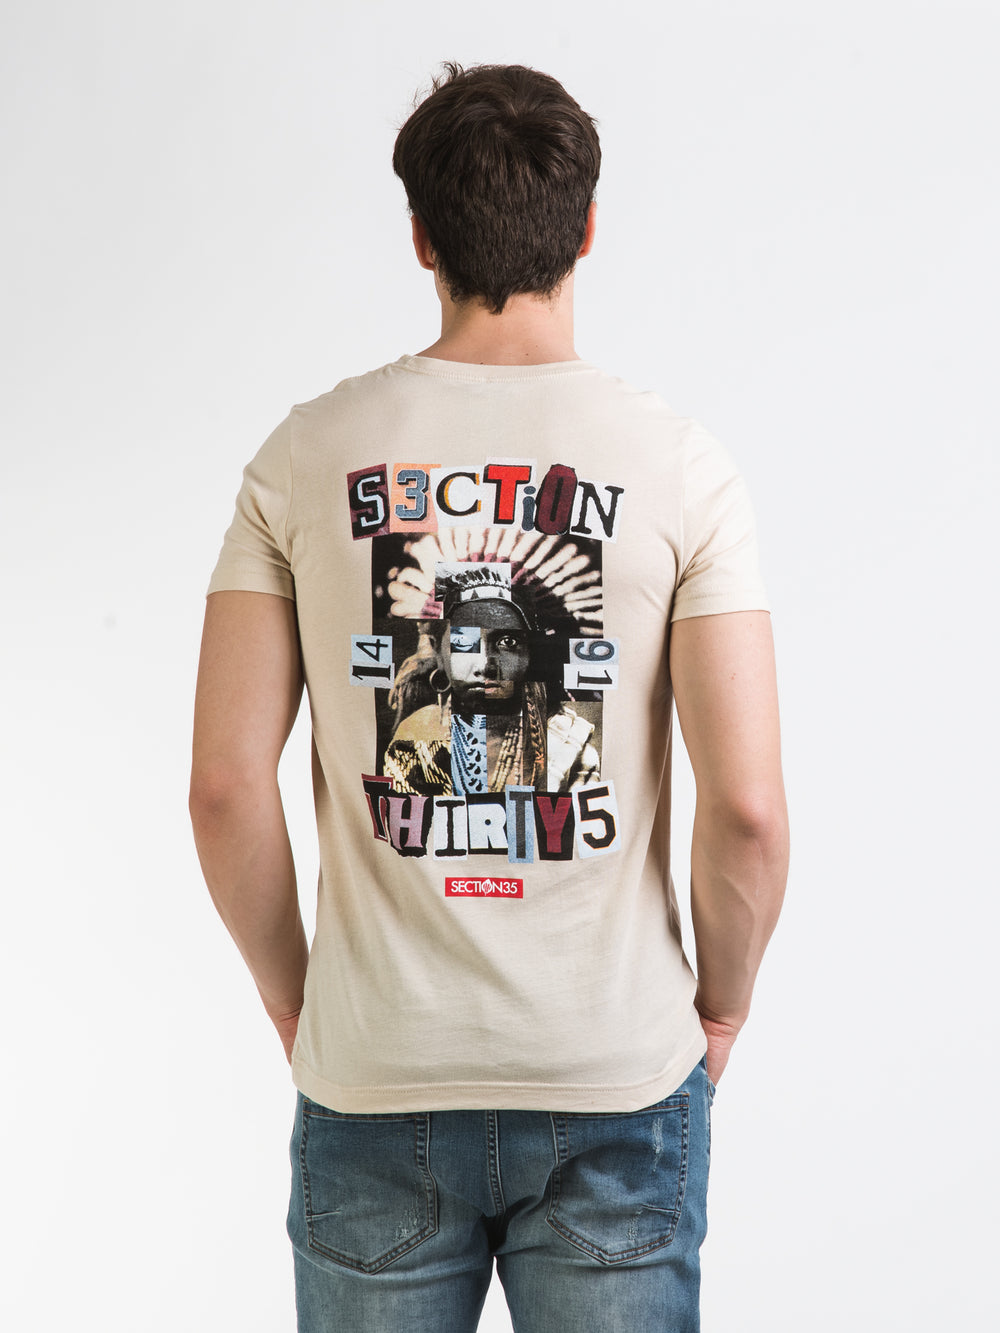 SECTION 35 PAST=PRESENT T-SHIRT - CLEARANCE